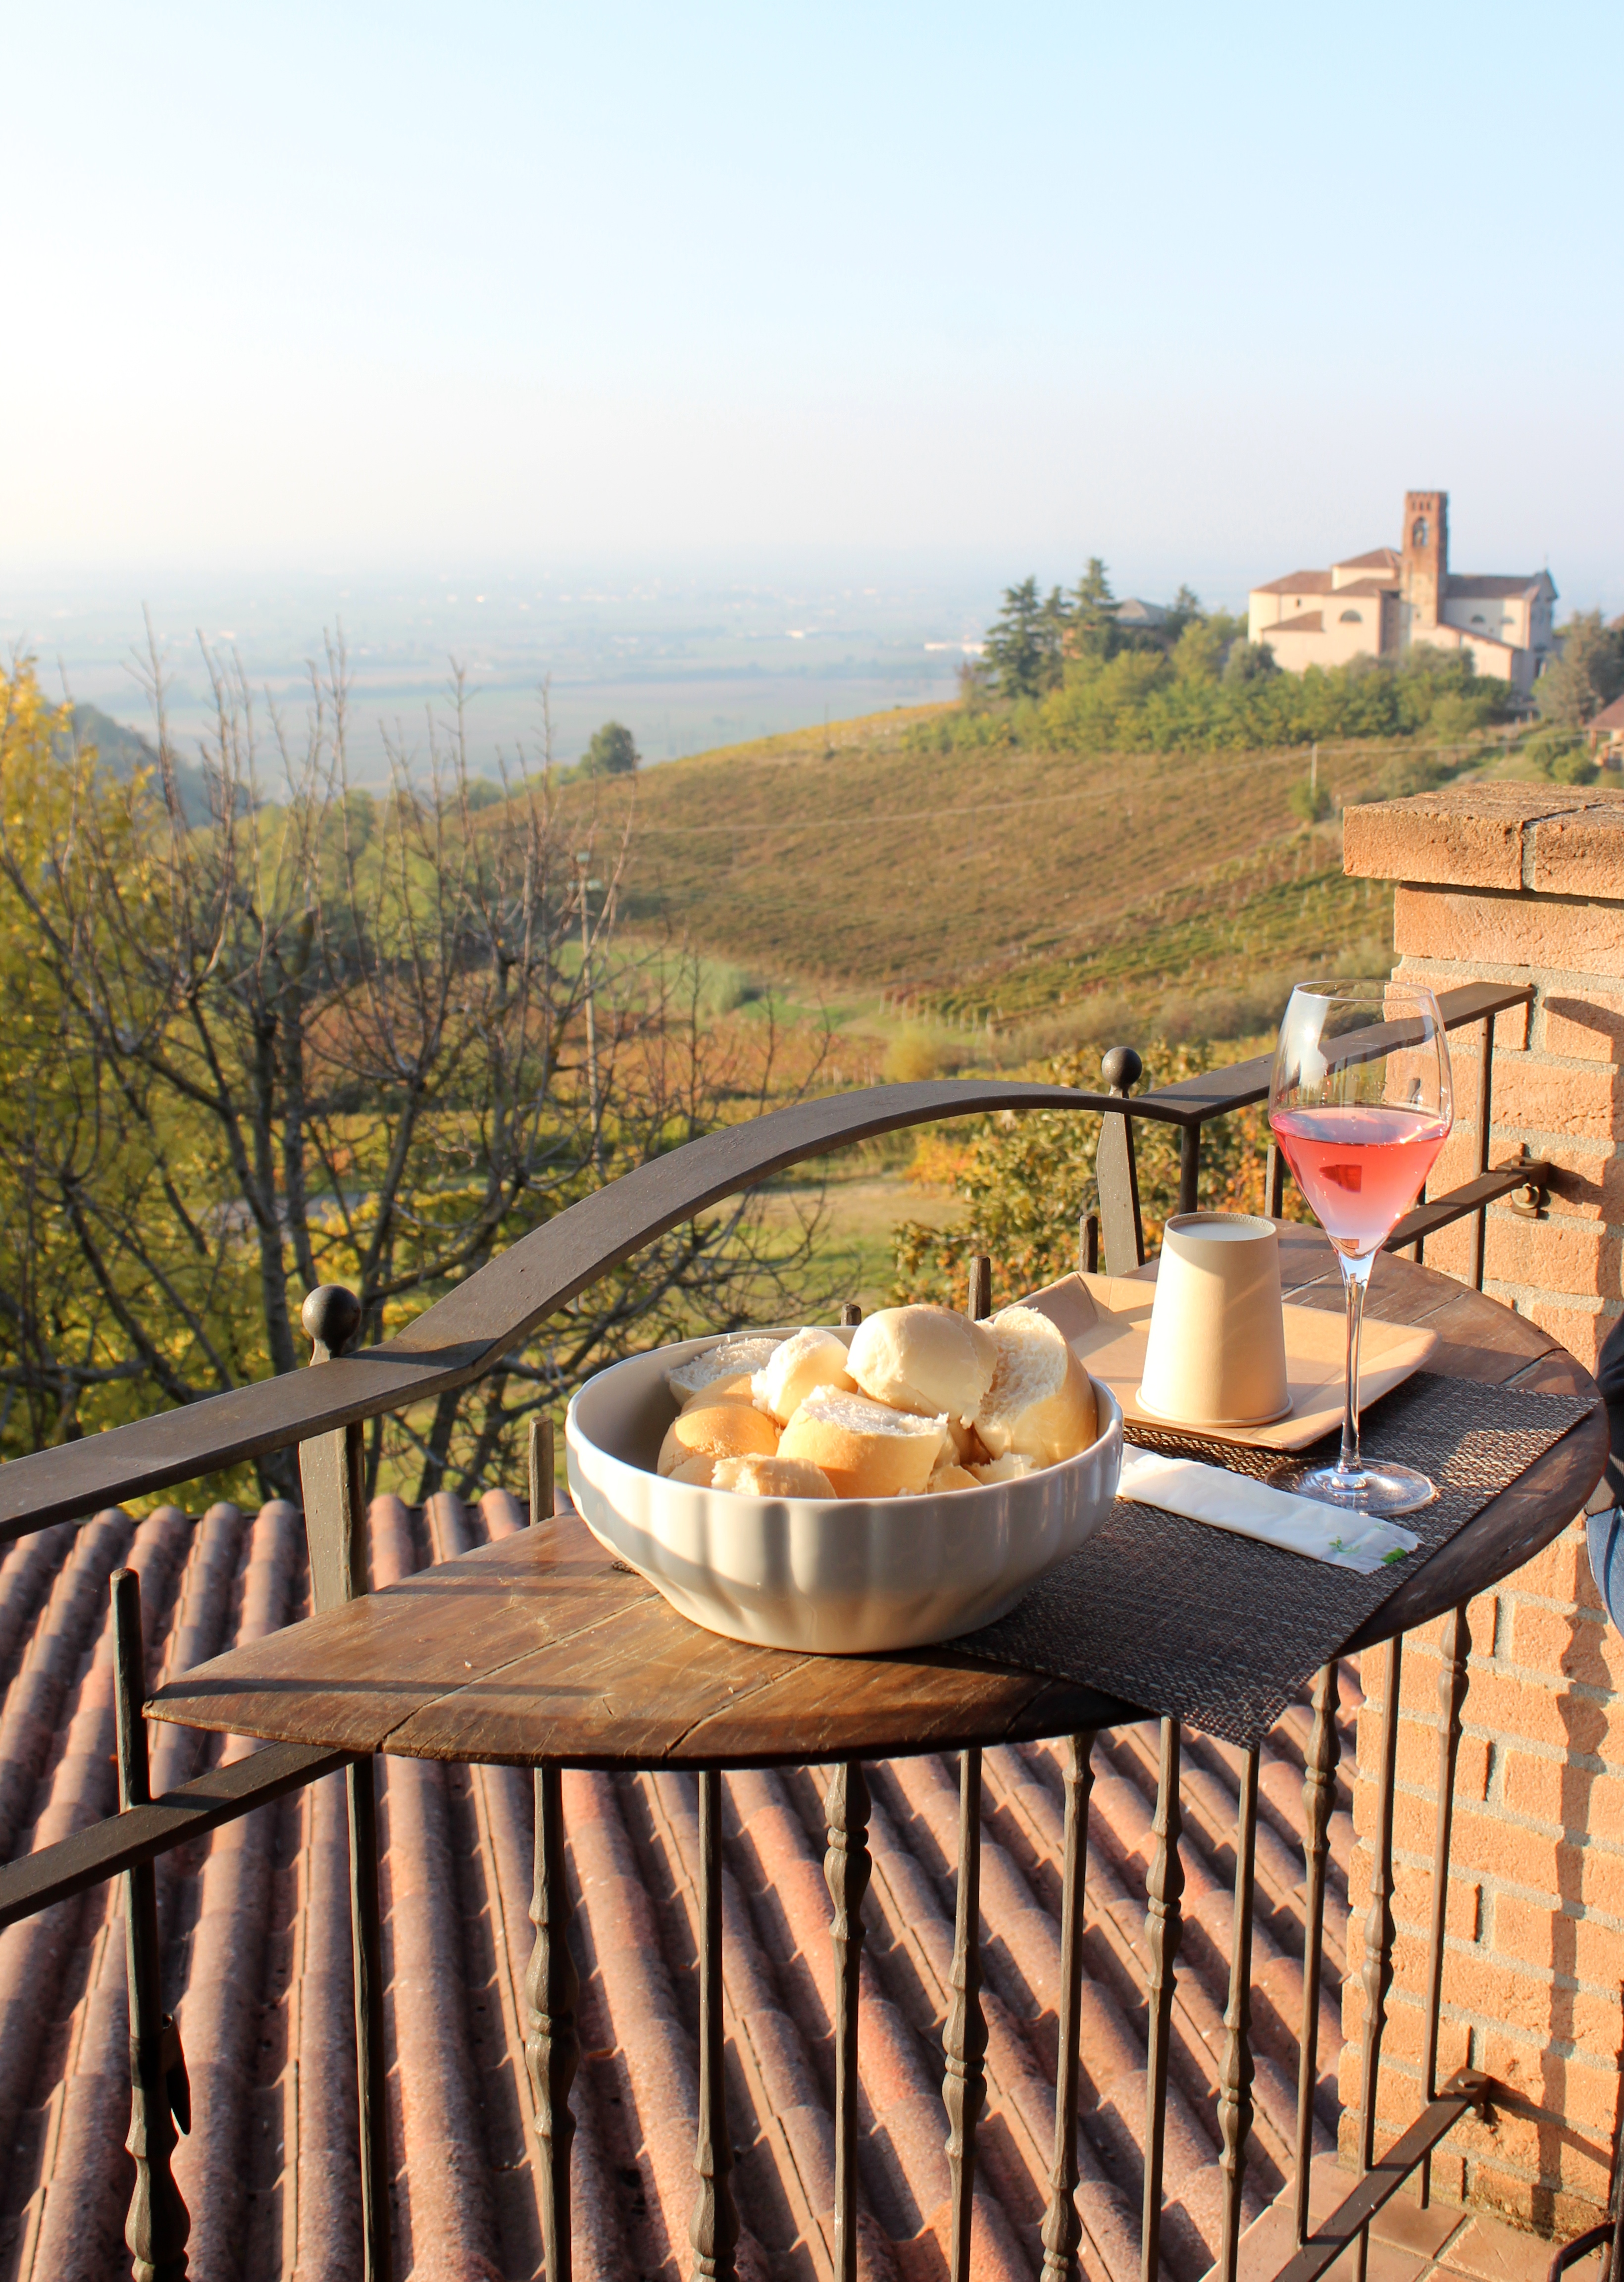 The festive lunch in the hills of Pavia